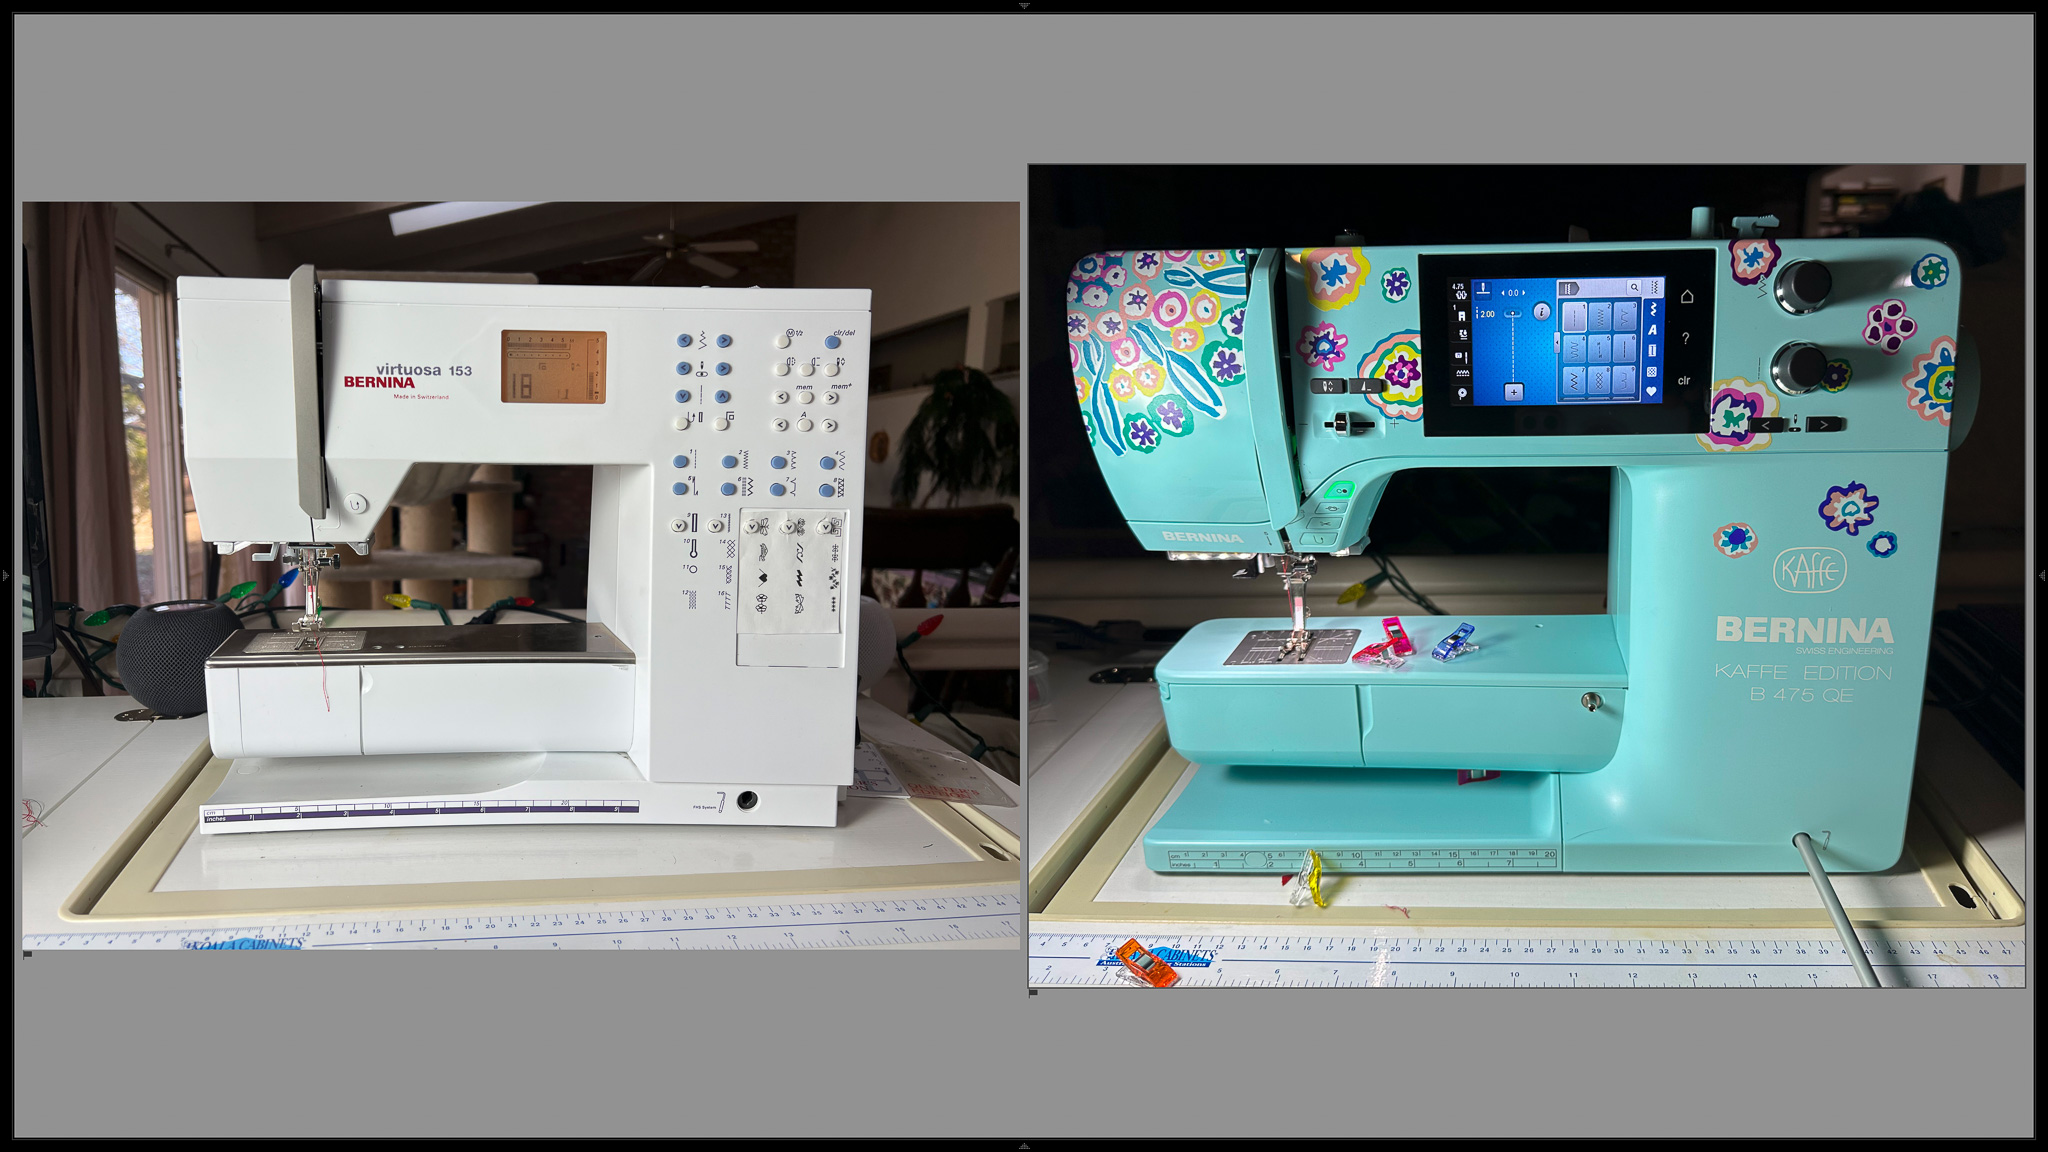 20 year old Bernina 153 QE sewing machine, in standard white, on the left. 2022 Kaffe Fassett Bernina 475QE sewing machine in beautiful teal with painted flowers from KF's fabric.